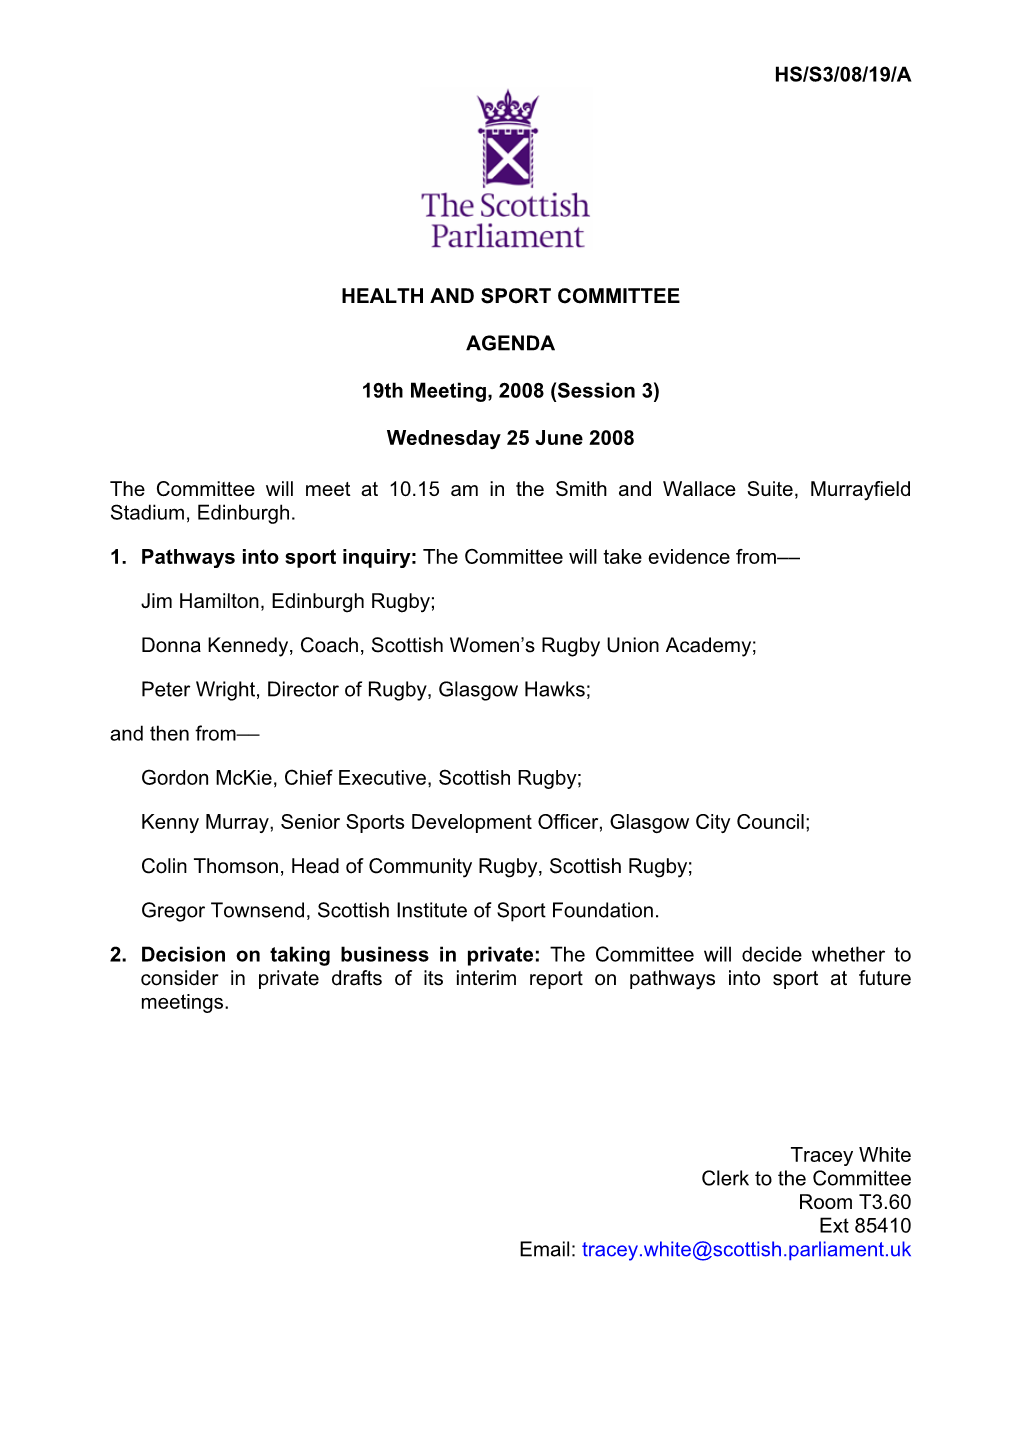 HS/S3/08/19/A HEALTH and SPORT COMMITTEE AGENDA 19Th